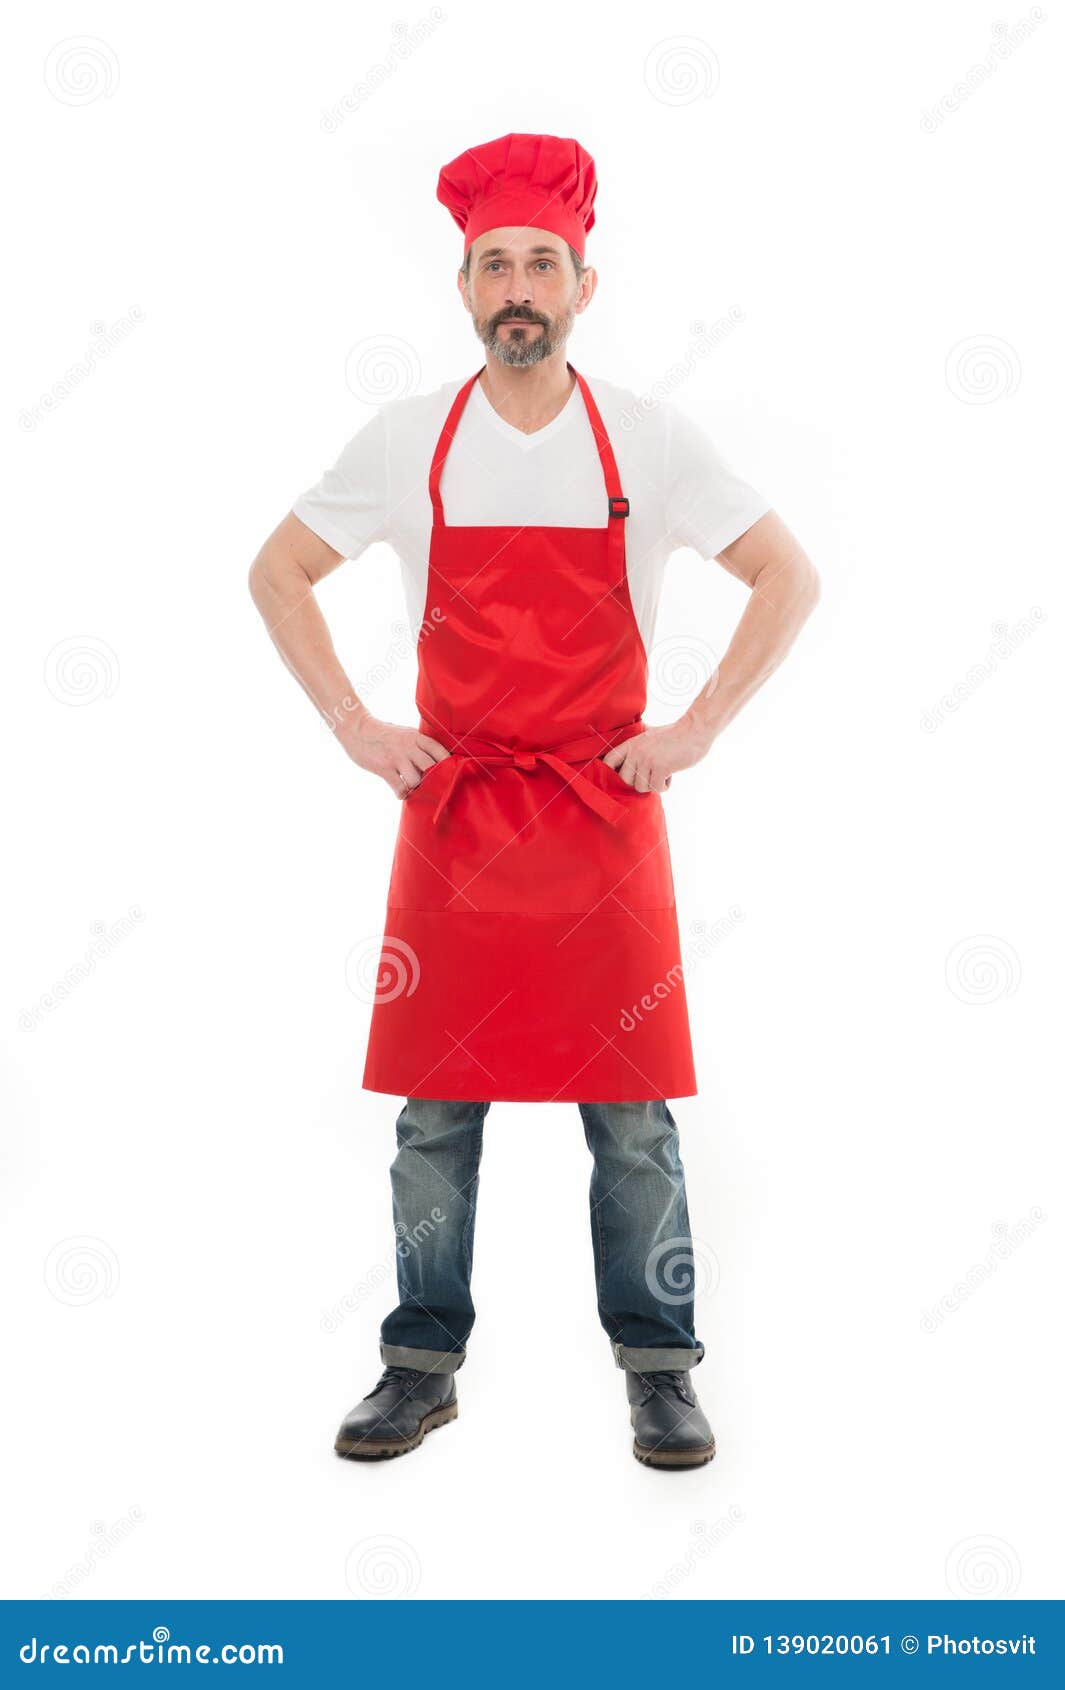 Housework Includes Cooking And Cleaning Bearded Mature Man In Chef Hat And Apron Stock Image 